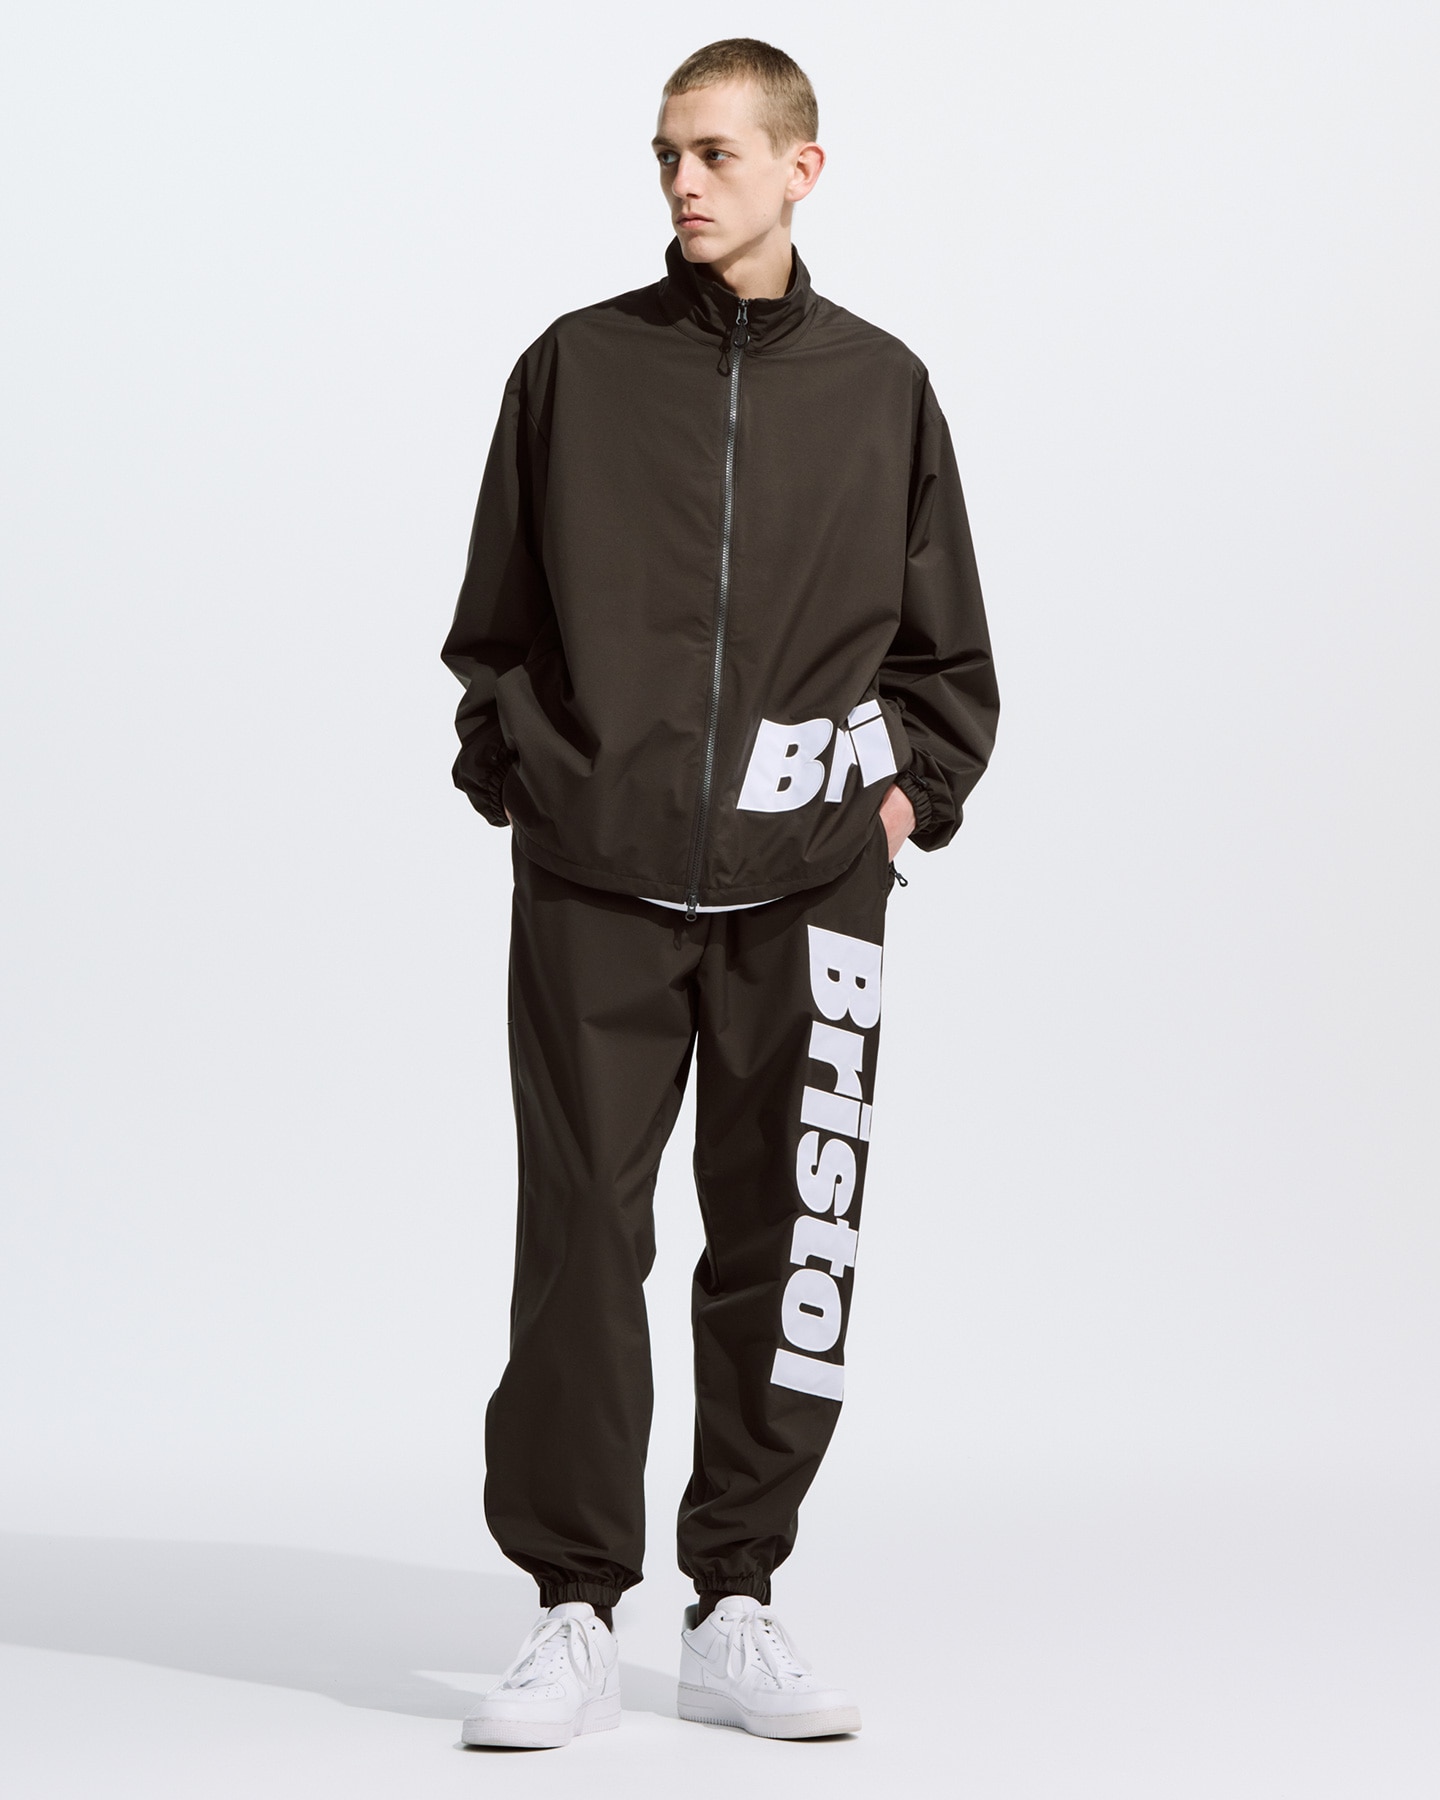 FCRB  23AW TEAM SWEAT PANTS  新品タグ付匿名発送致します